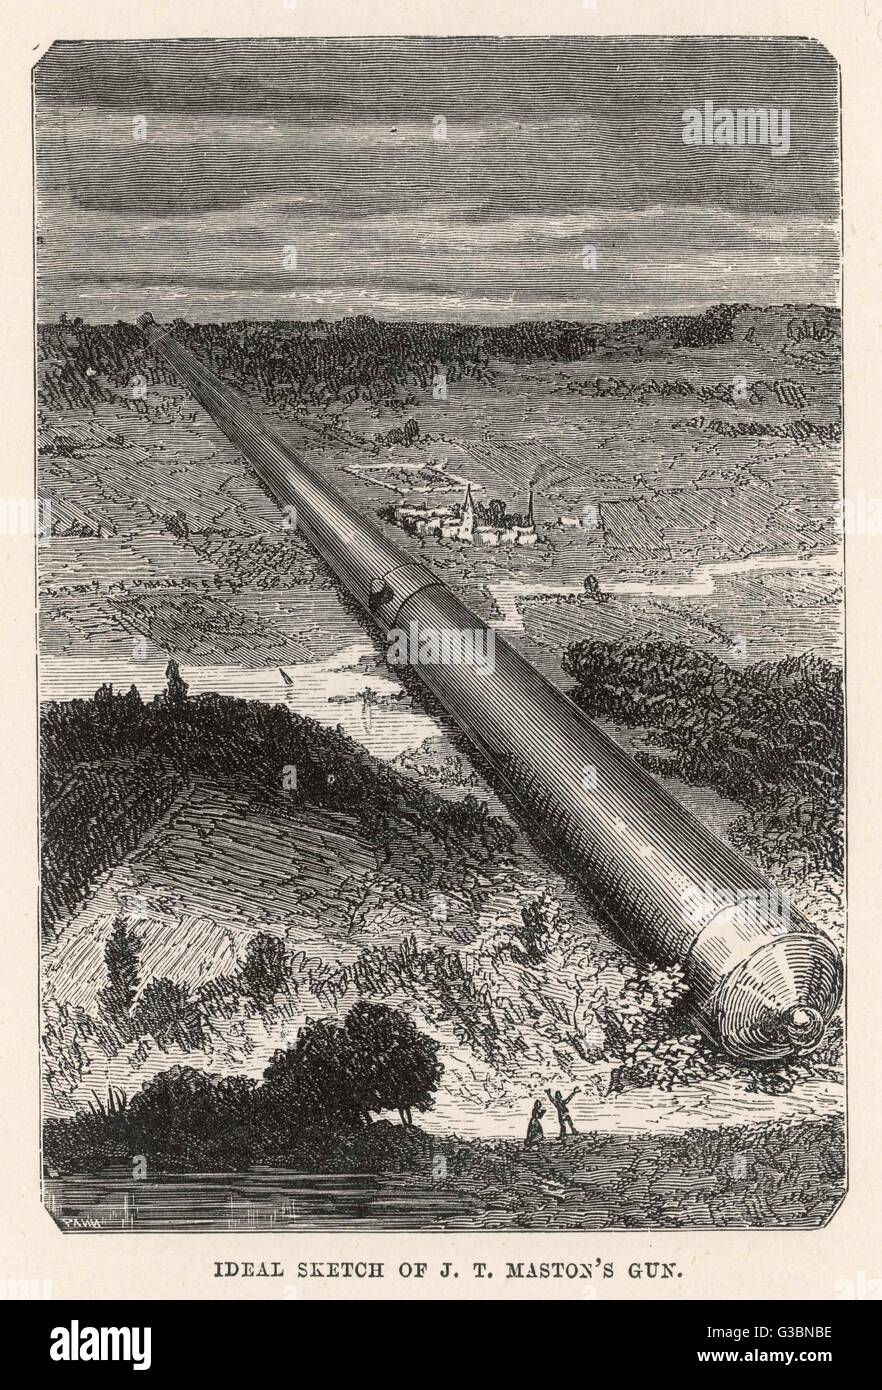 'DE LA TERRE A LA LUNE' ('From the Earth to the Moon')  a sketch of J.T. Maston's gun from which the moon rocket will be fired.       Date: 1865 Stock Photo